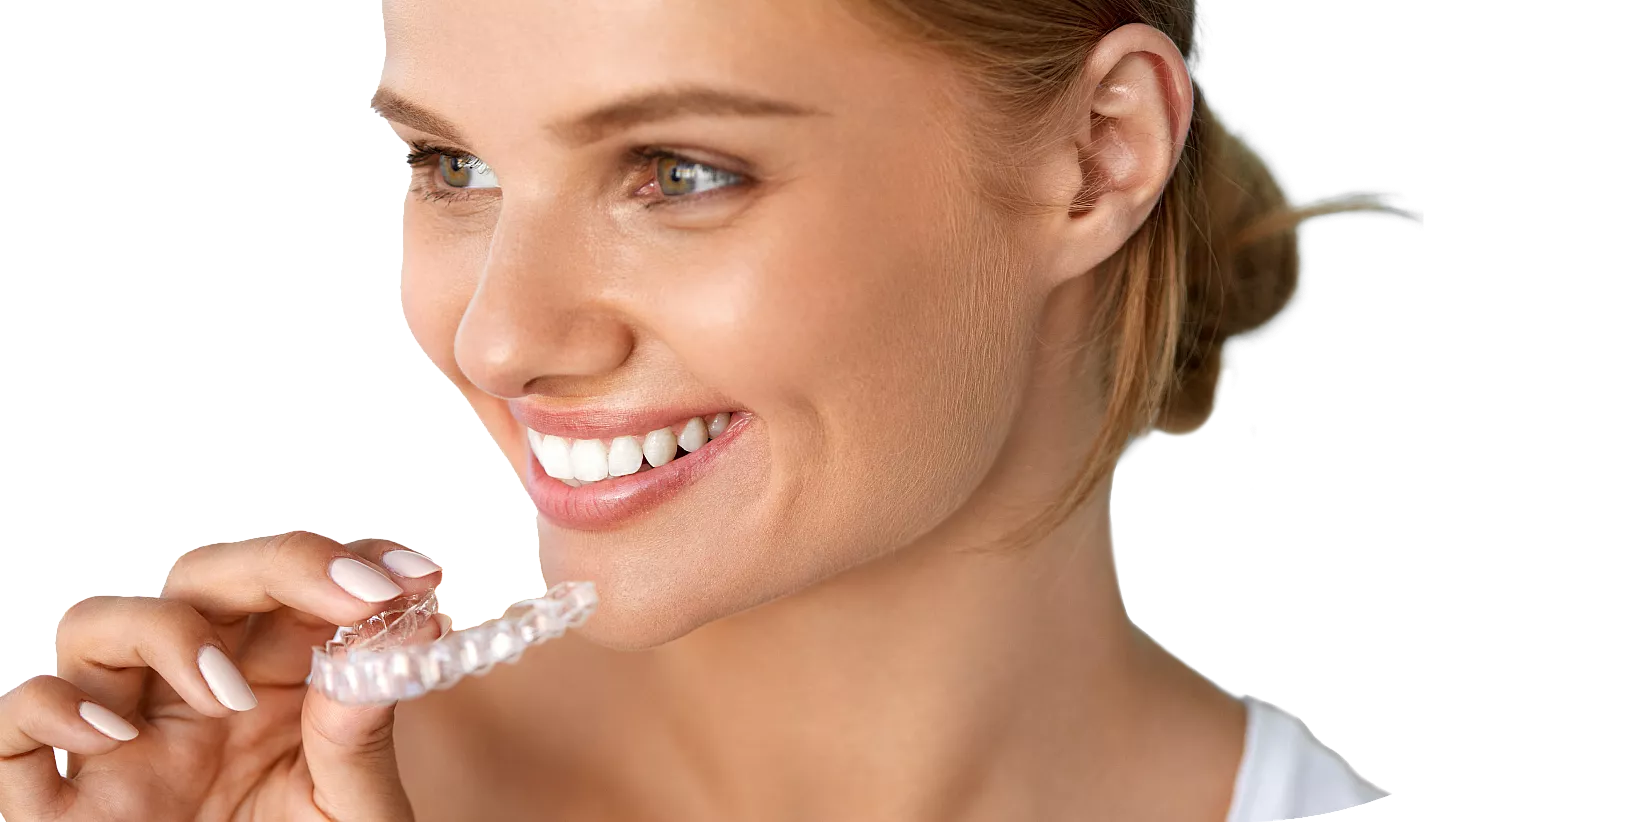 Orthodontic services